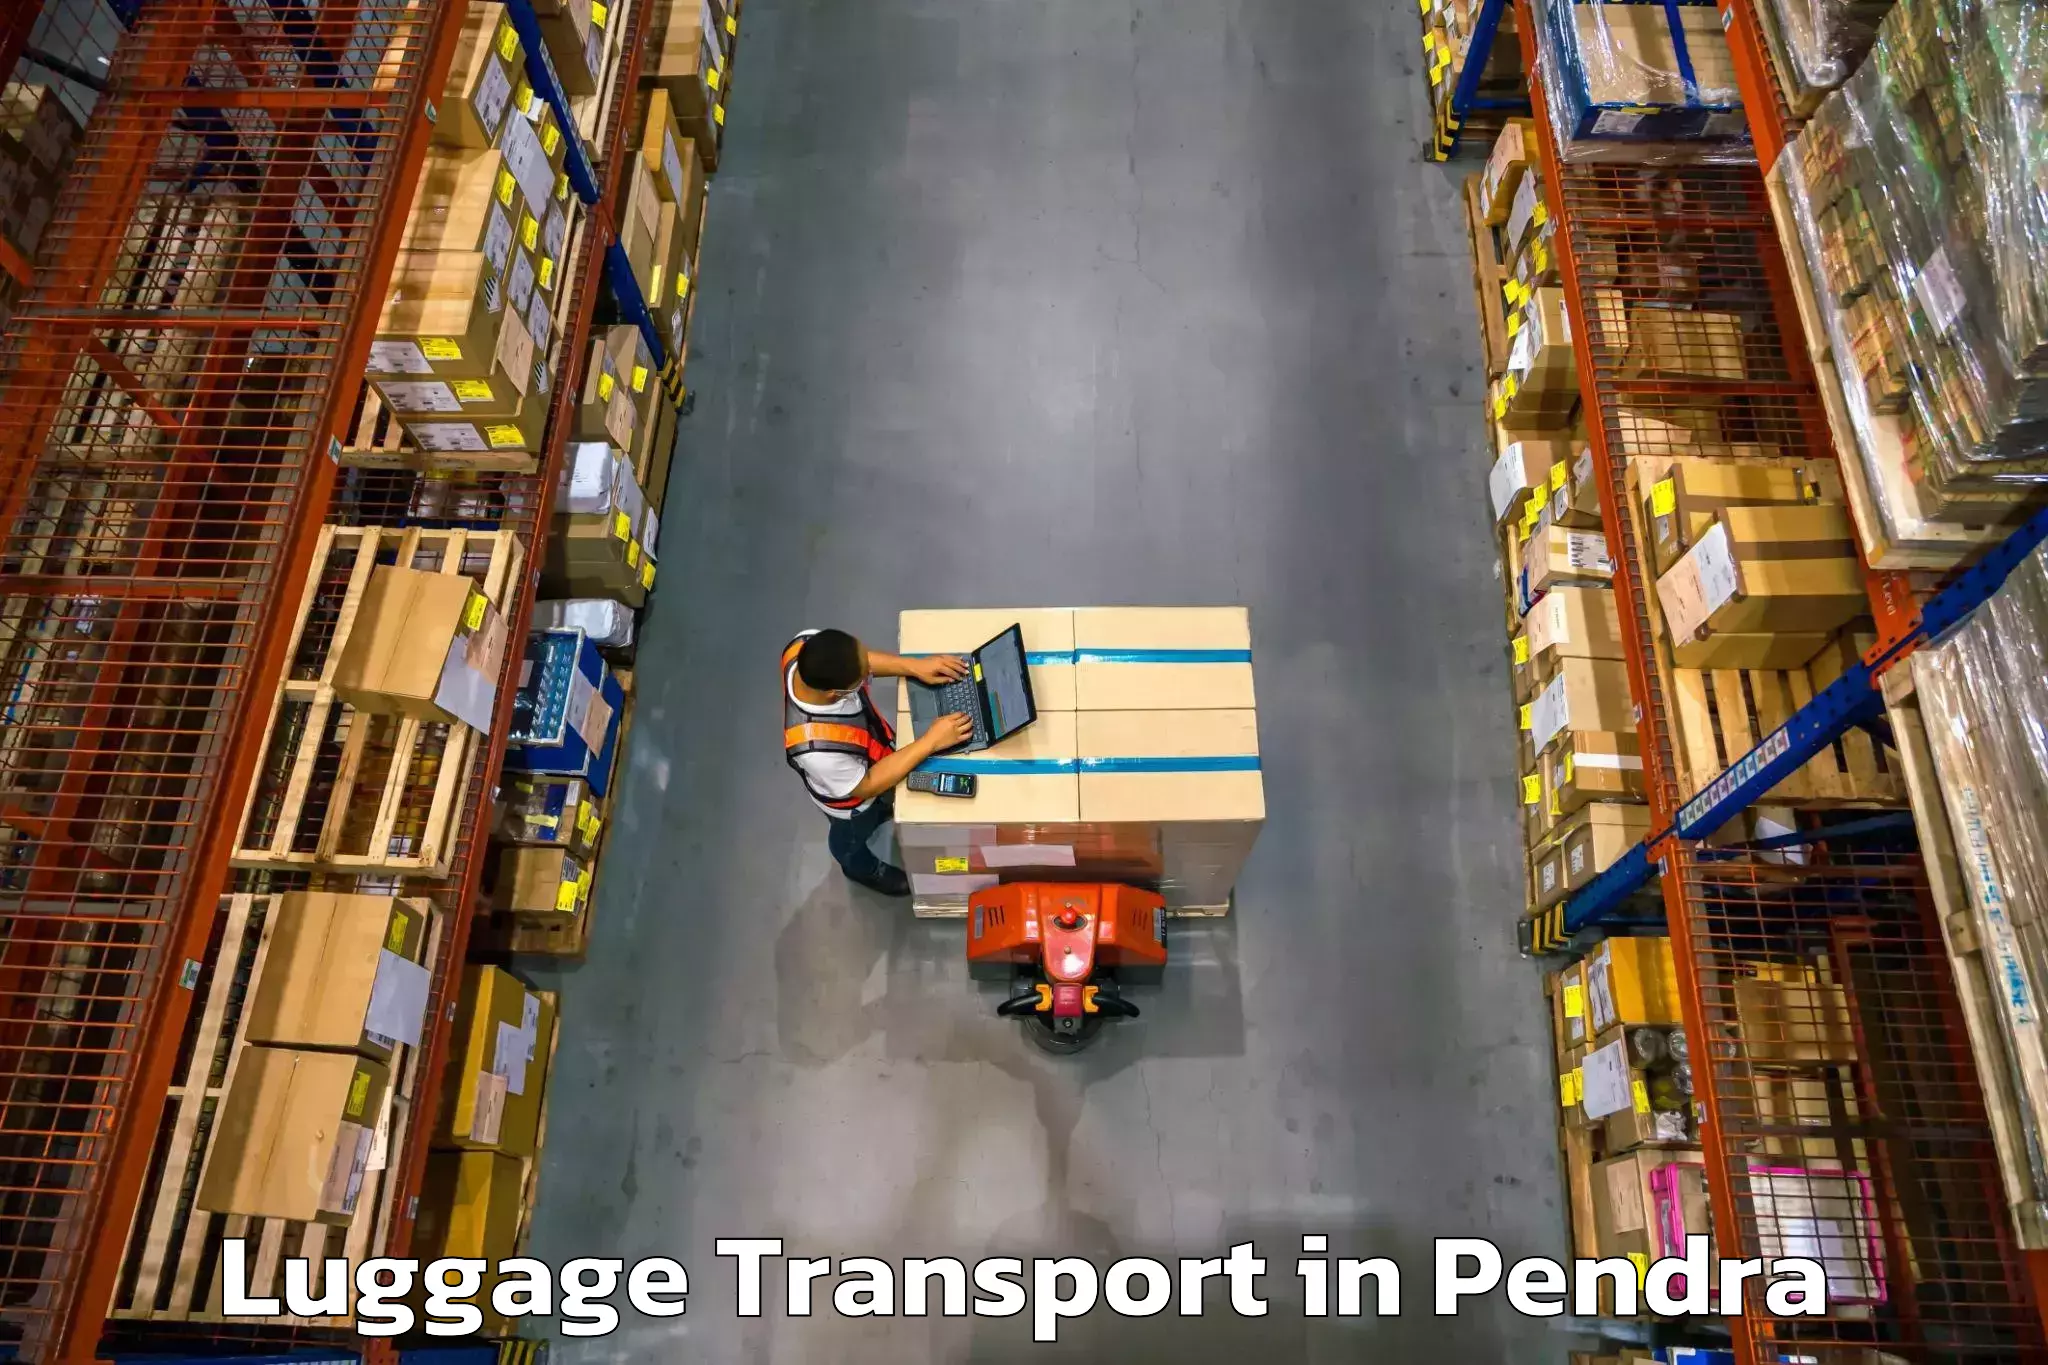 Student luggage transport in Pendra